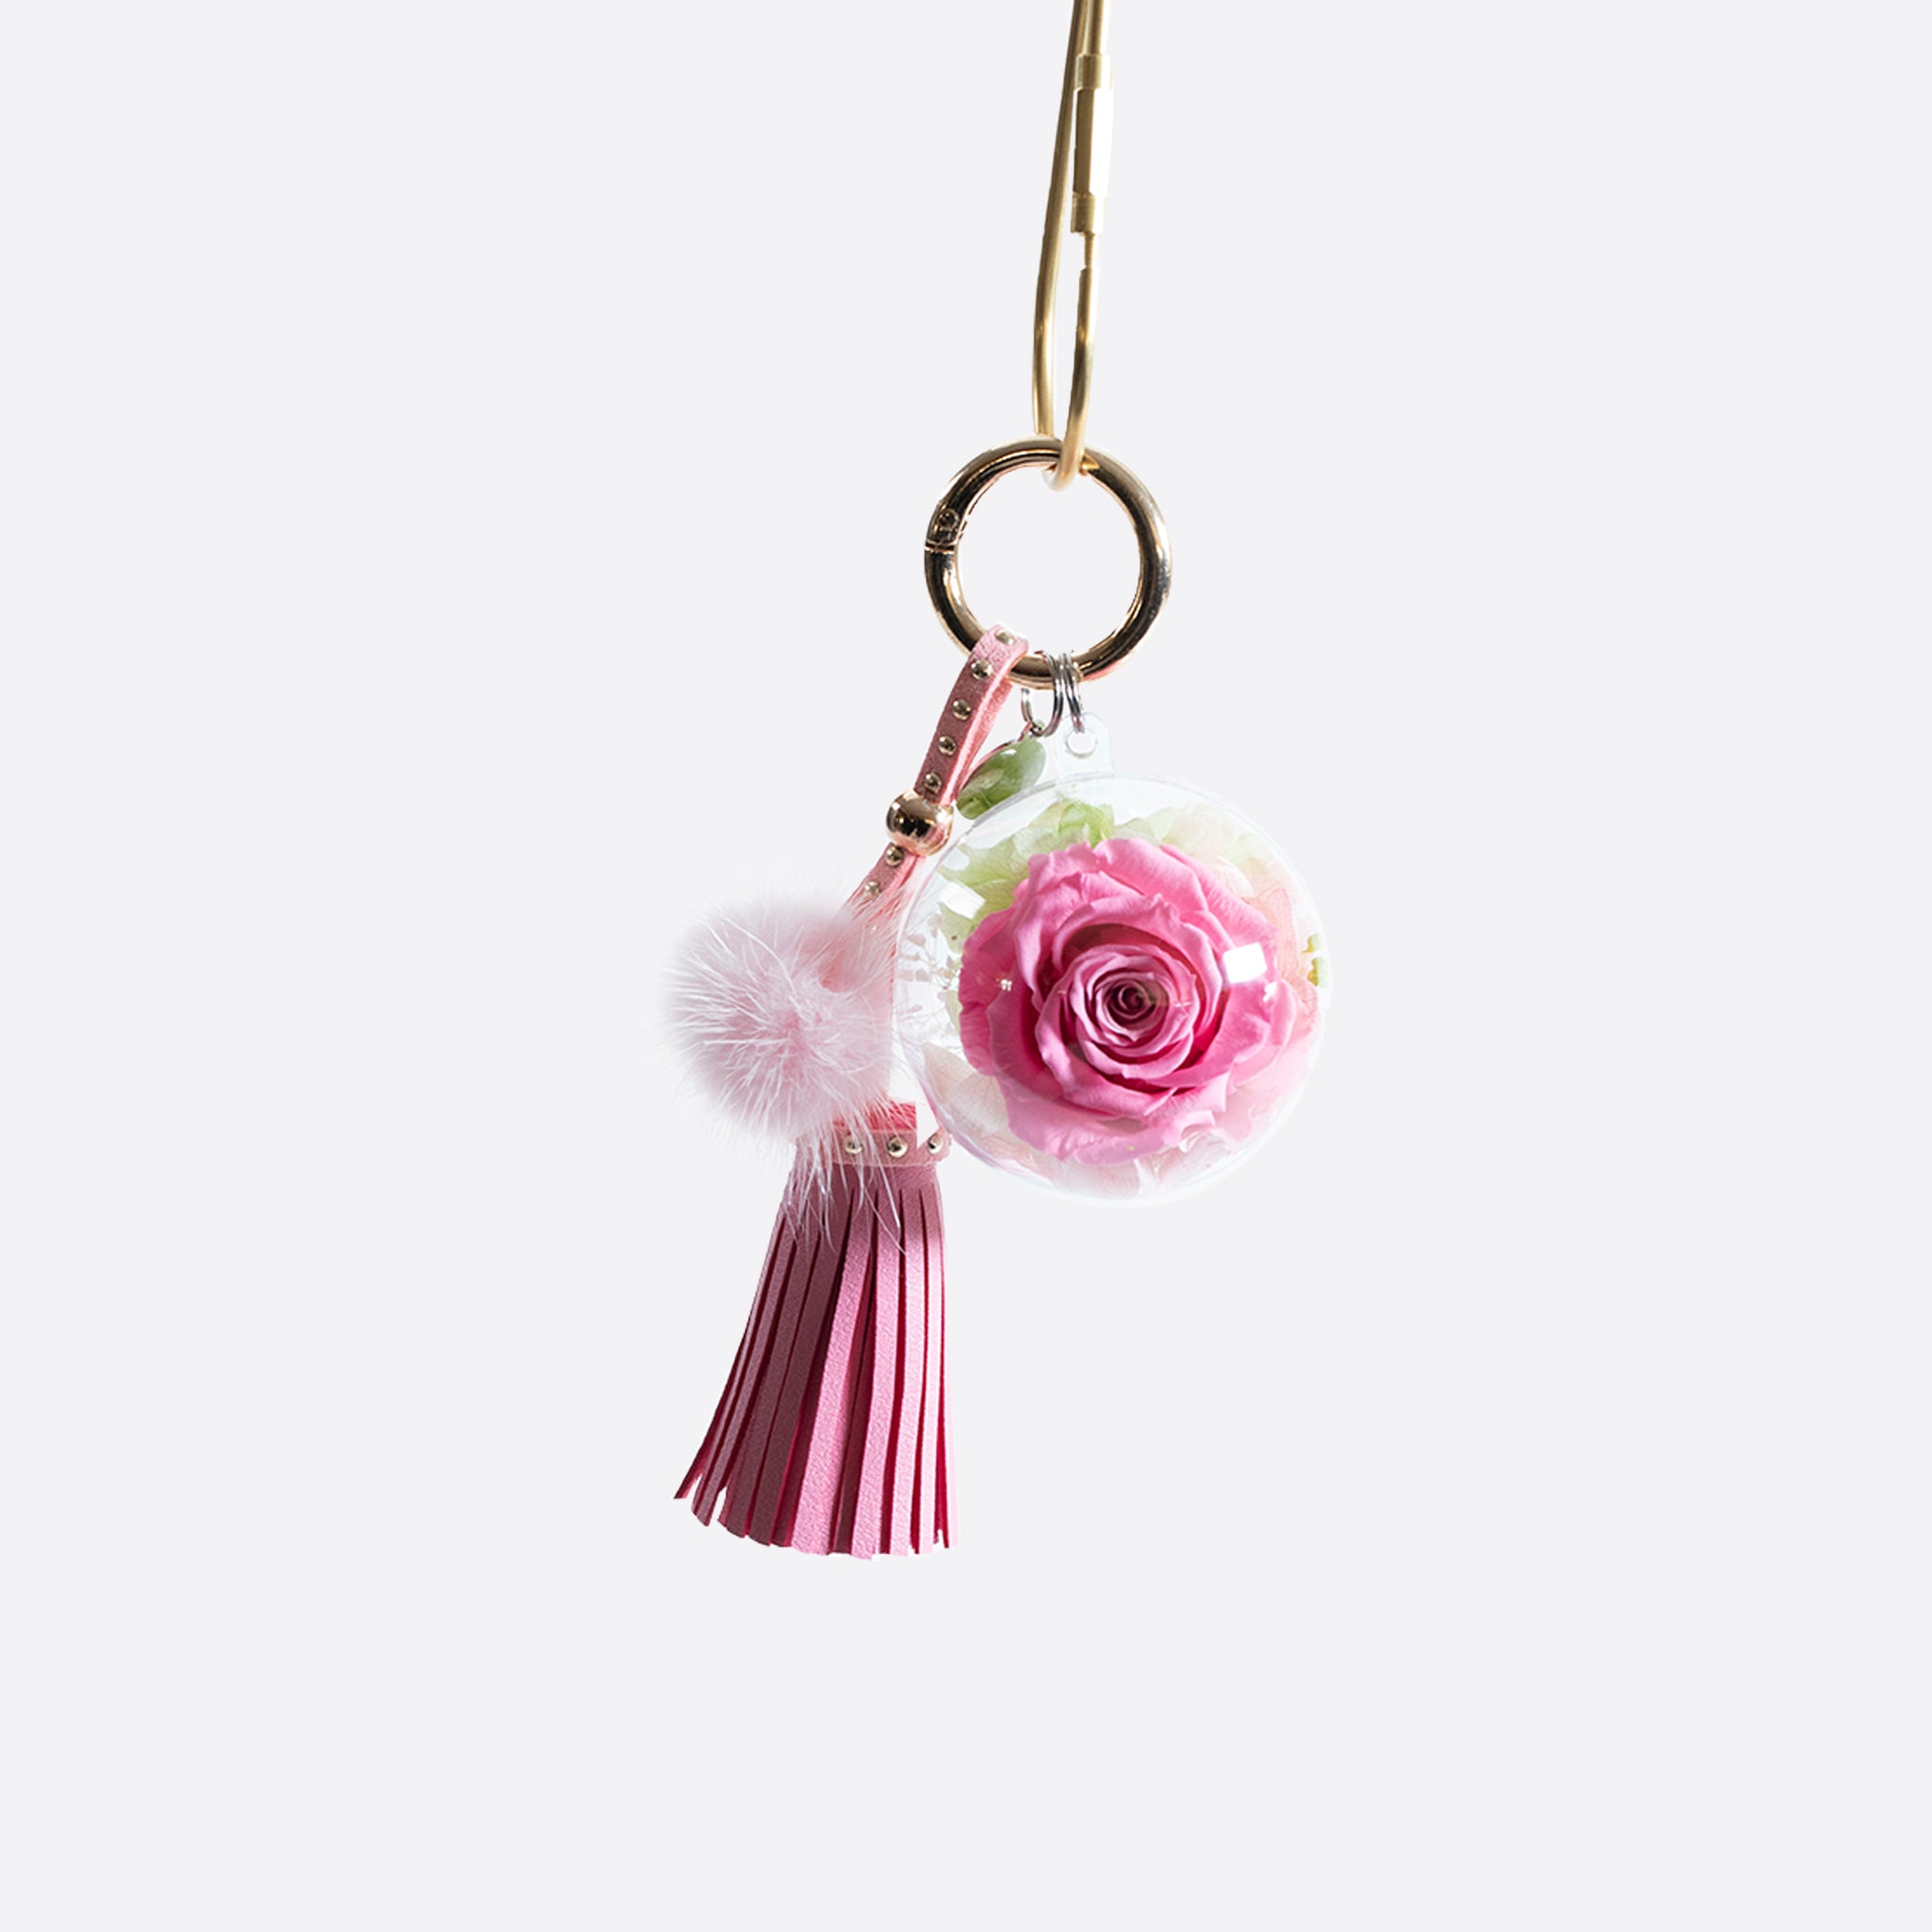 Fluffy Plush Ball Keychain Multicolor - Rose Red / 8 cm/3.1 Inches